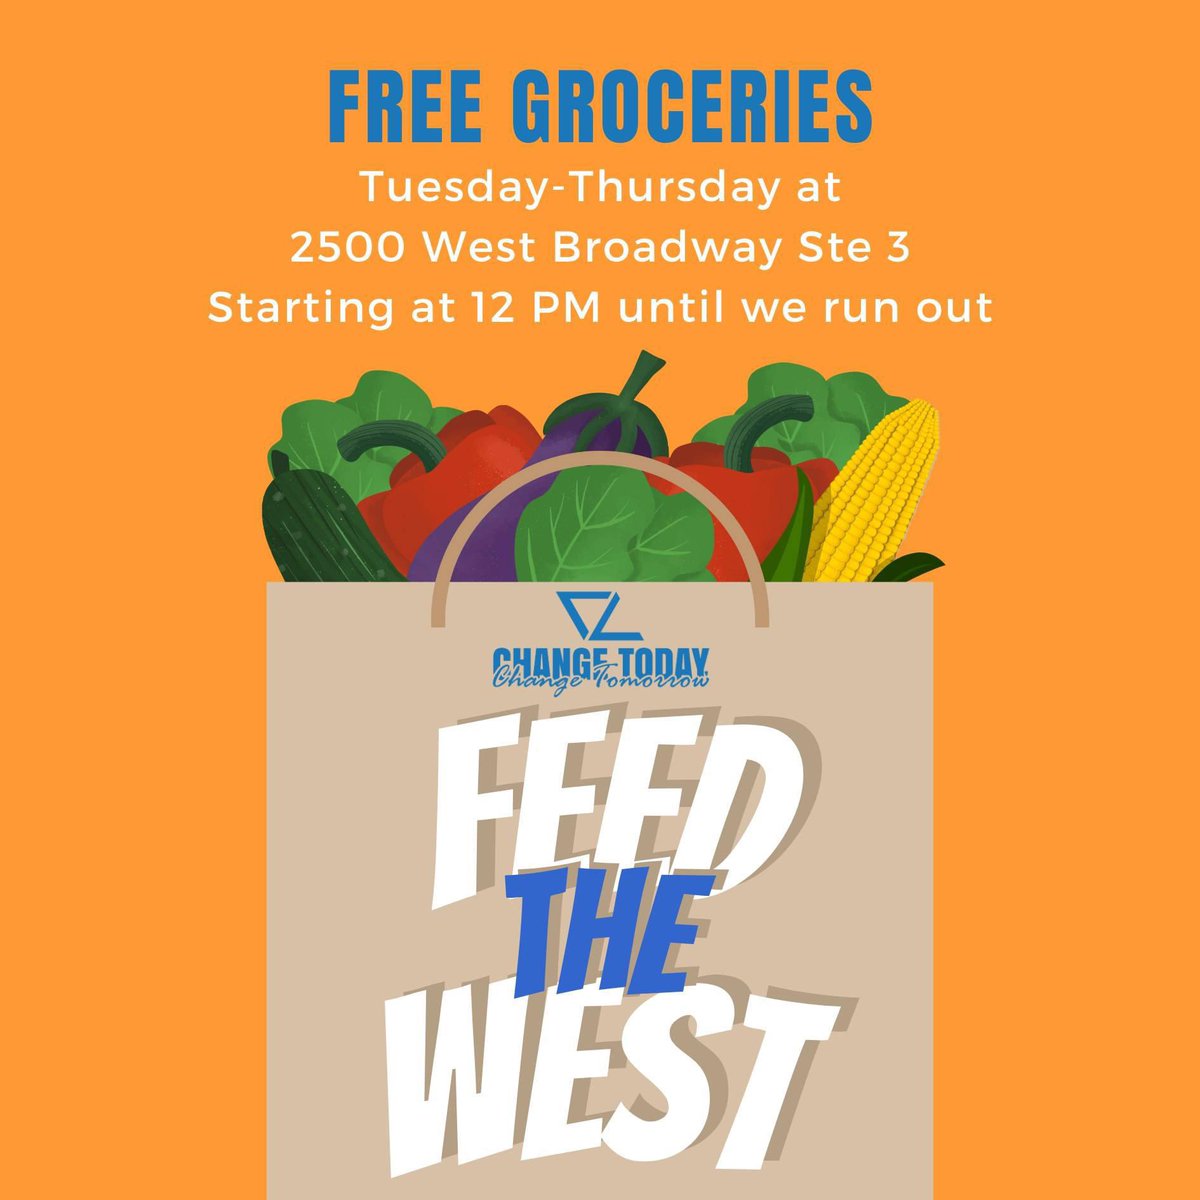 The Feed the West Free Grocery Pop-Up will be held at 2500 W Broadway Ste 3 this week due to inclement weather. We begin at 12pm and end when we run out of food.